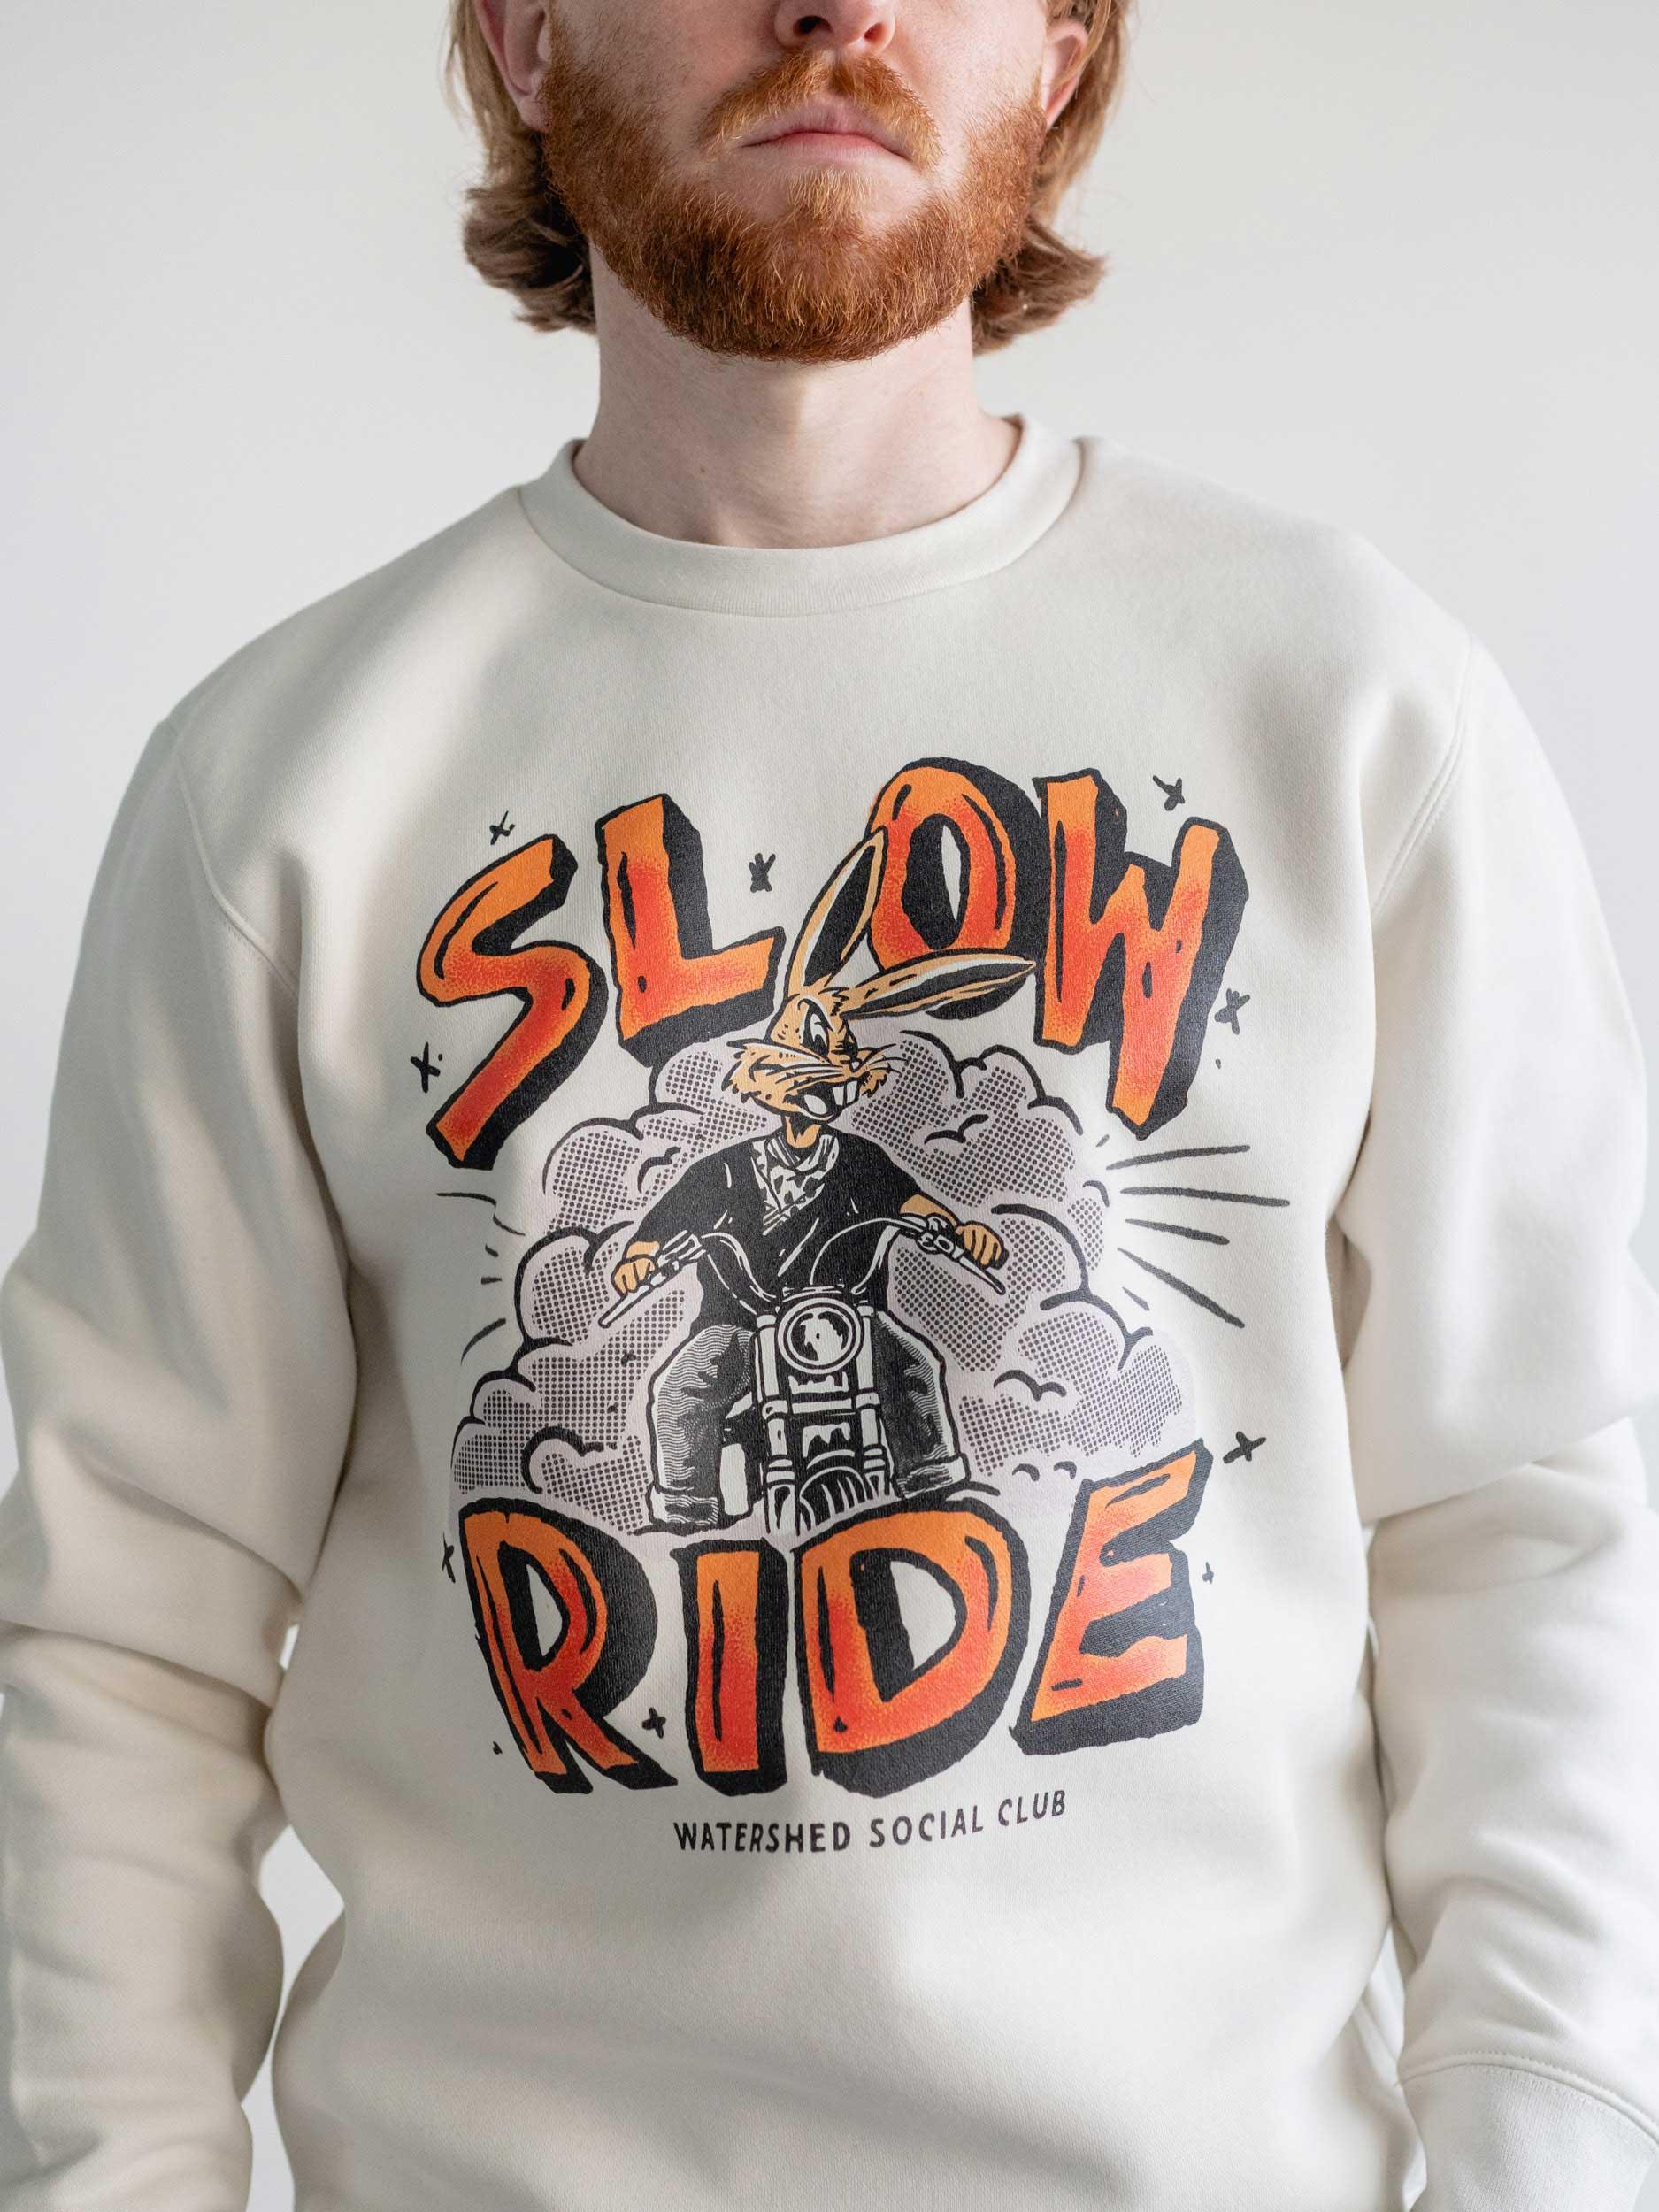 Slow Ride Crew - Watershed Brand